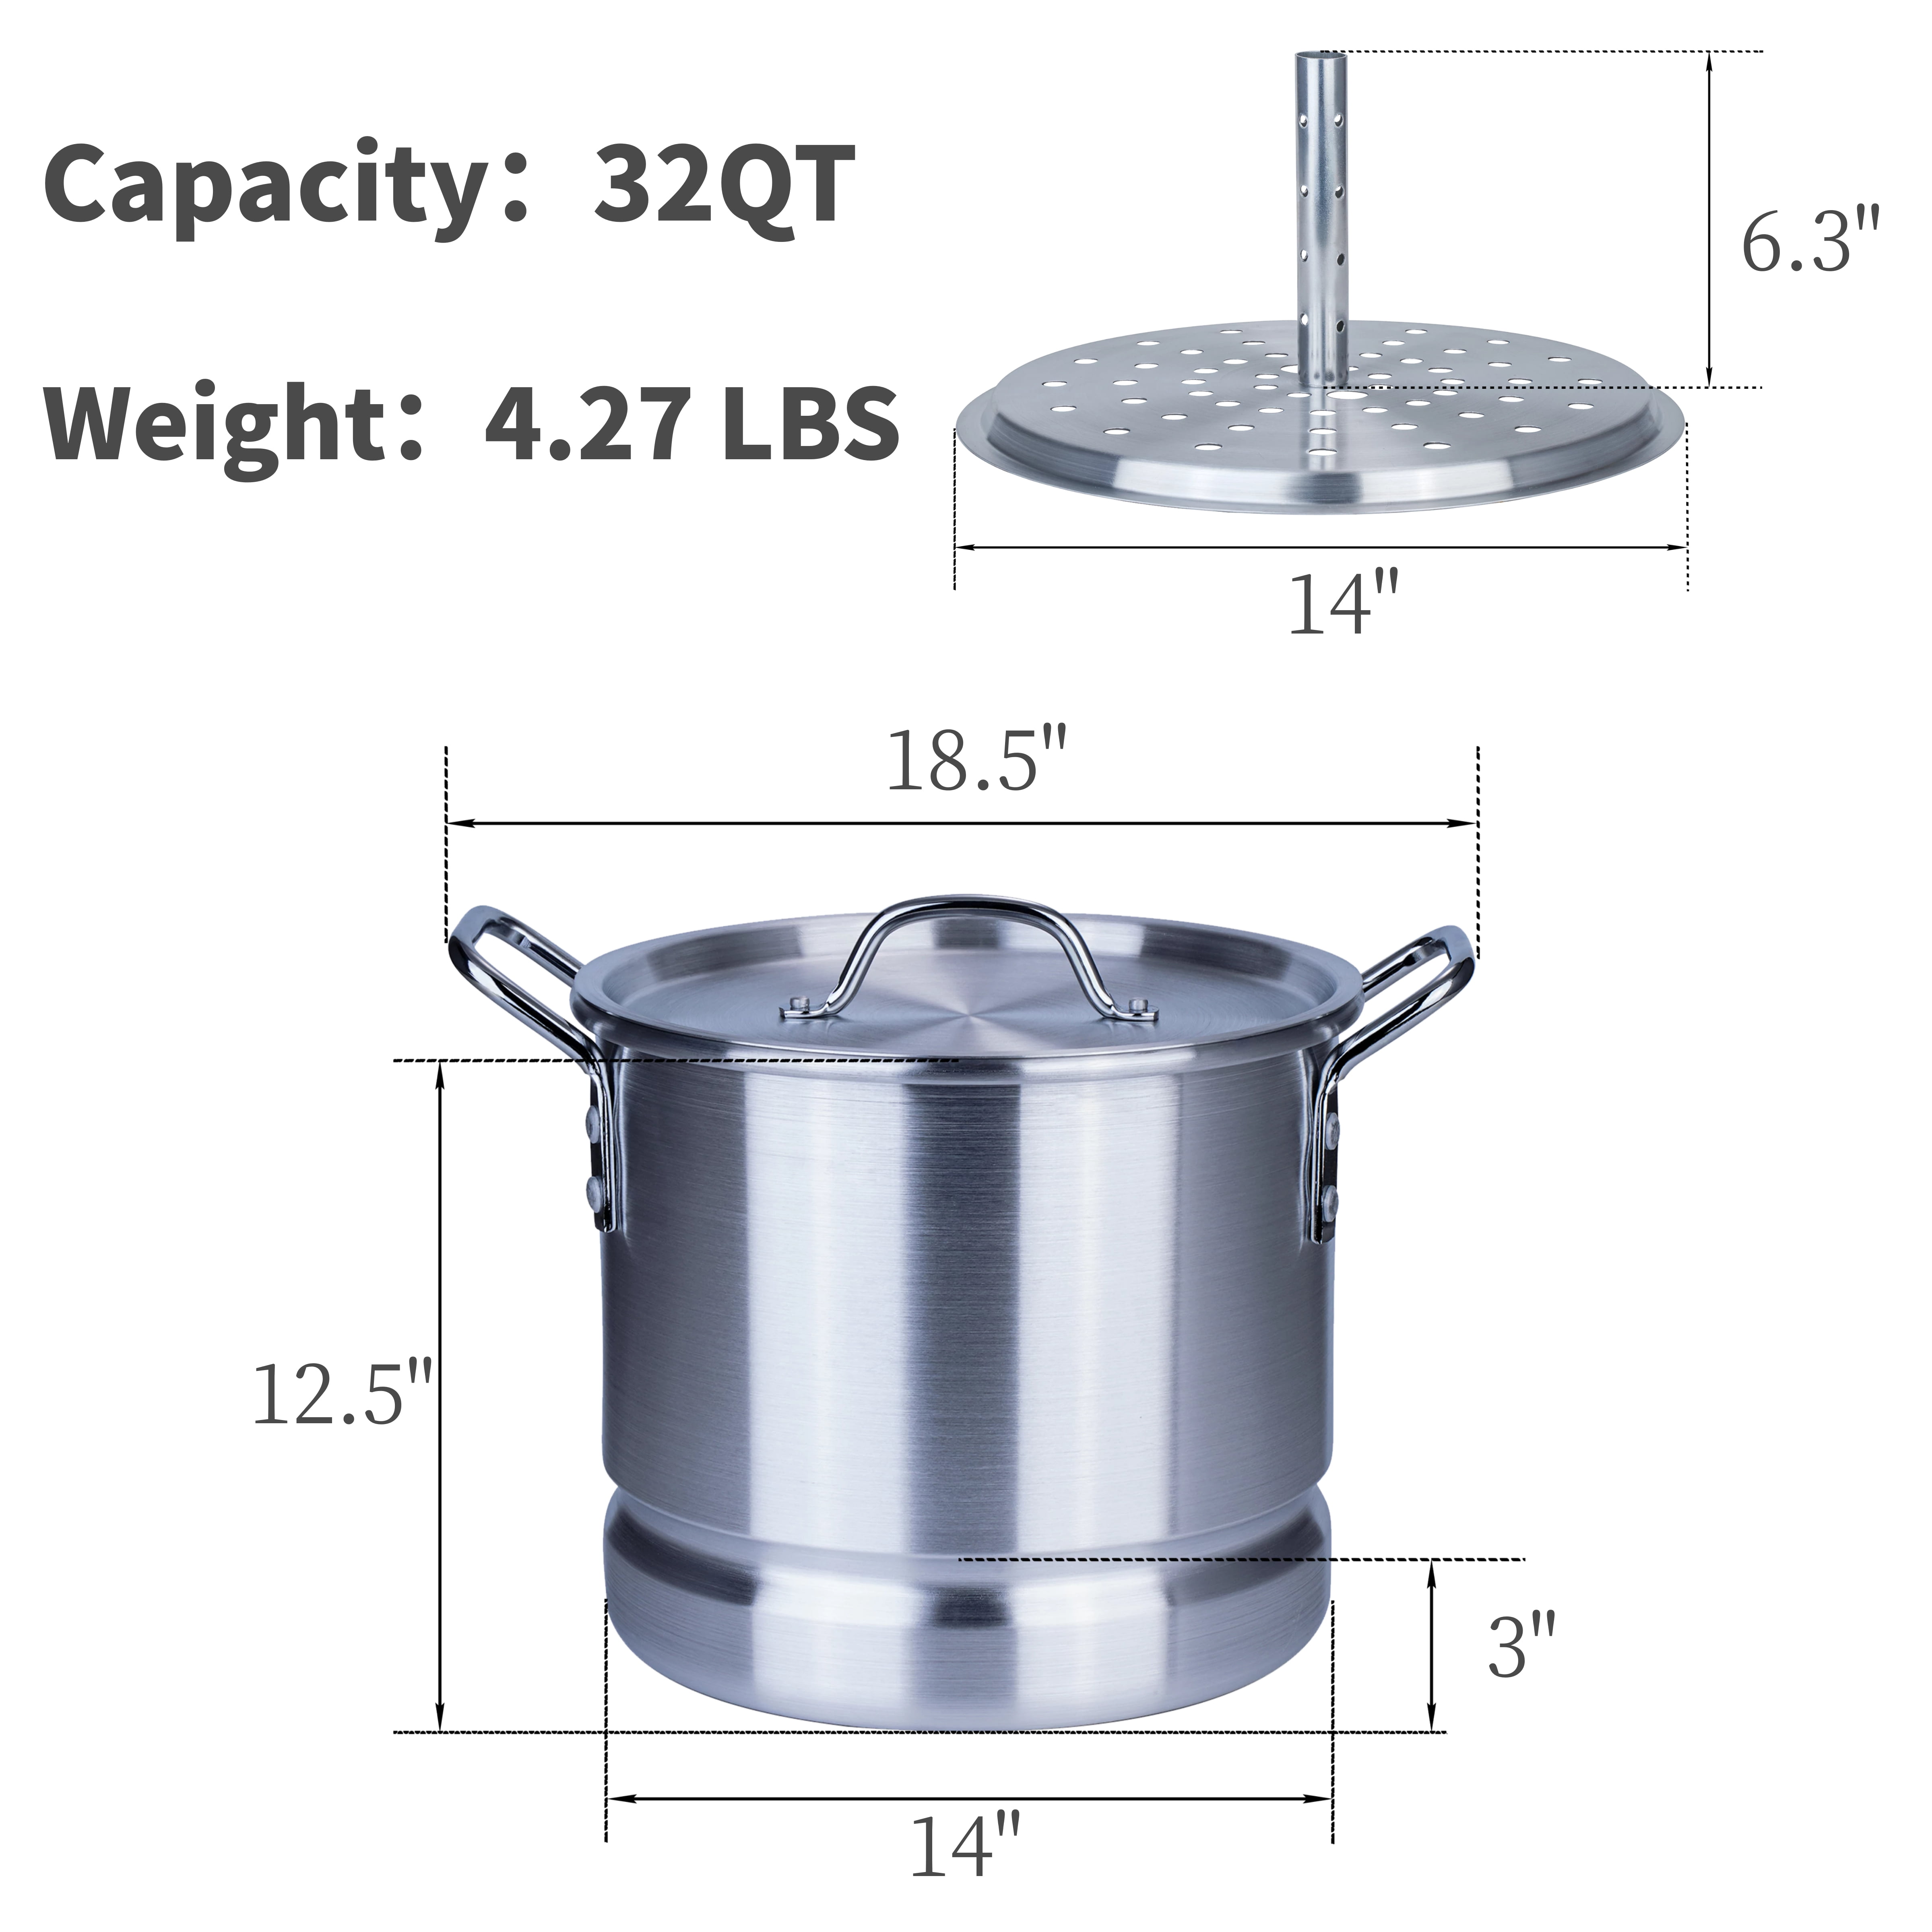 Discontinued 12 Quart Stockpot with Steamer Insert and Cover